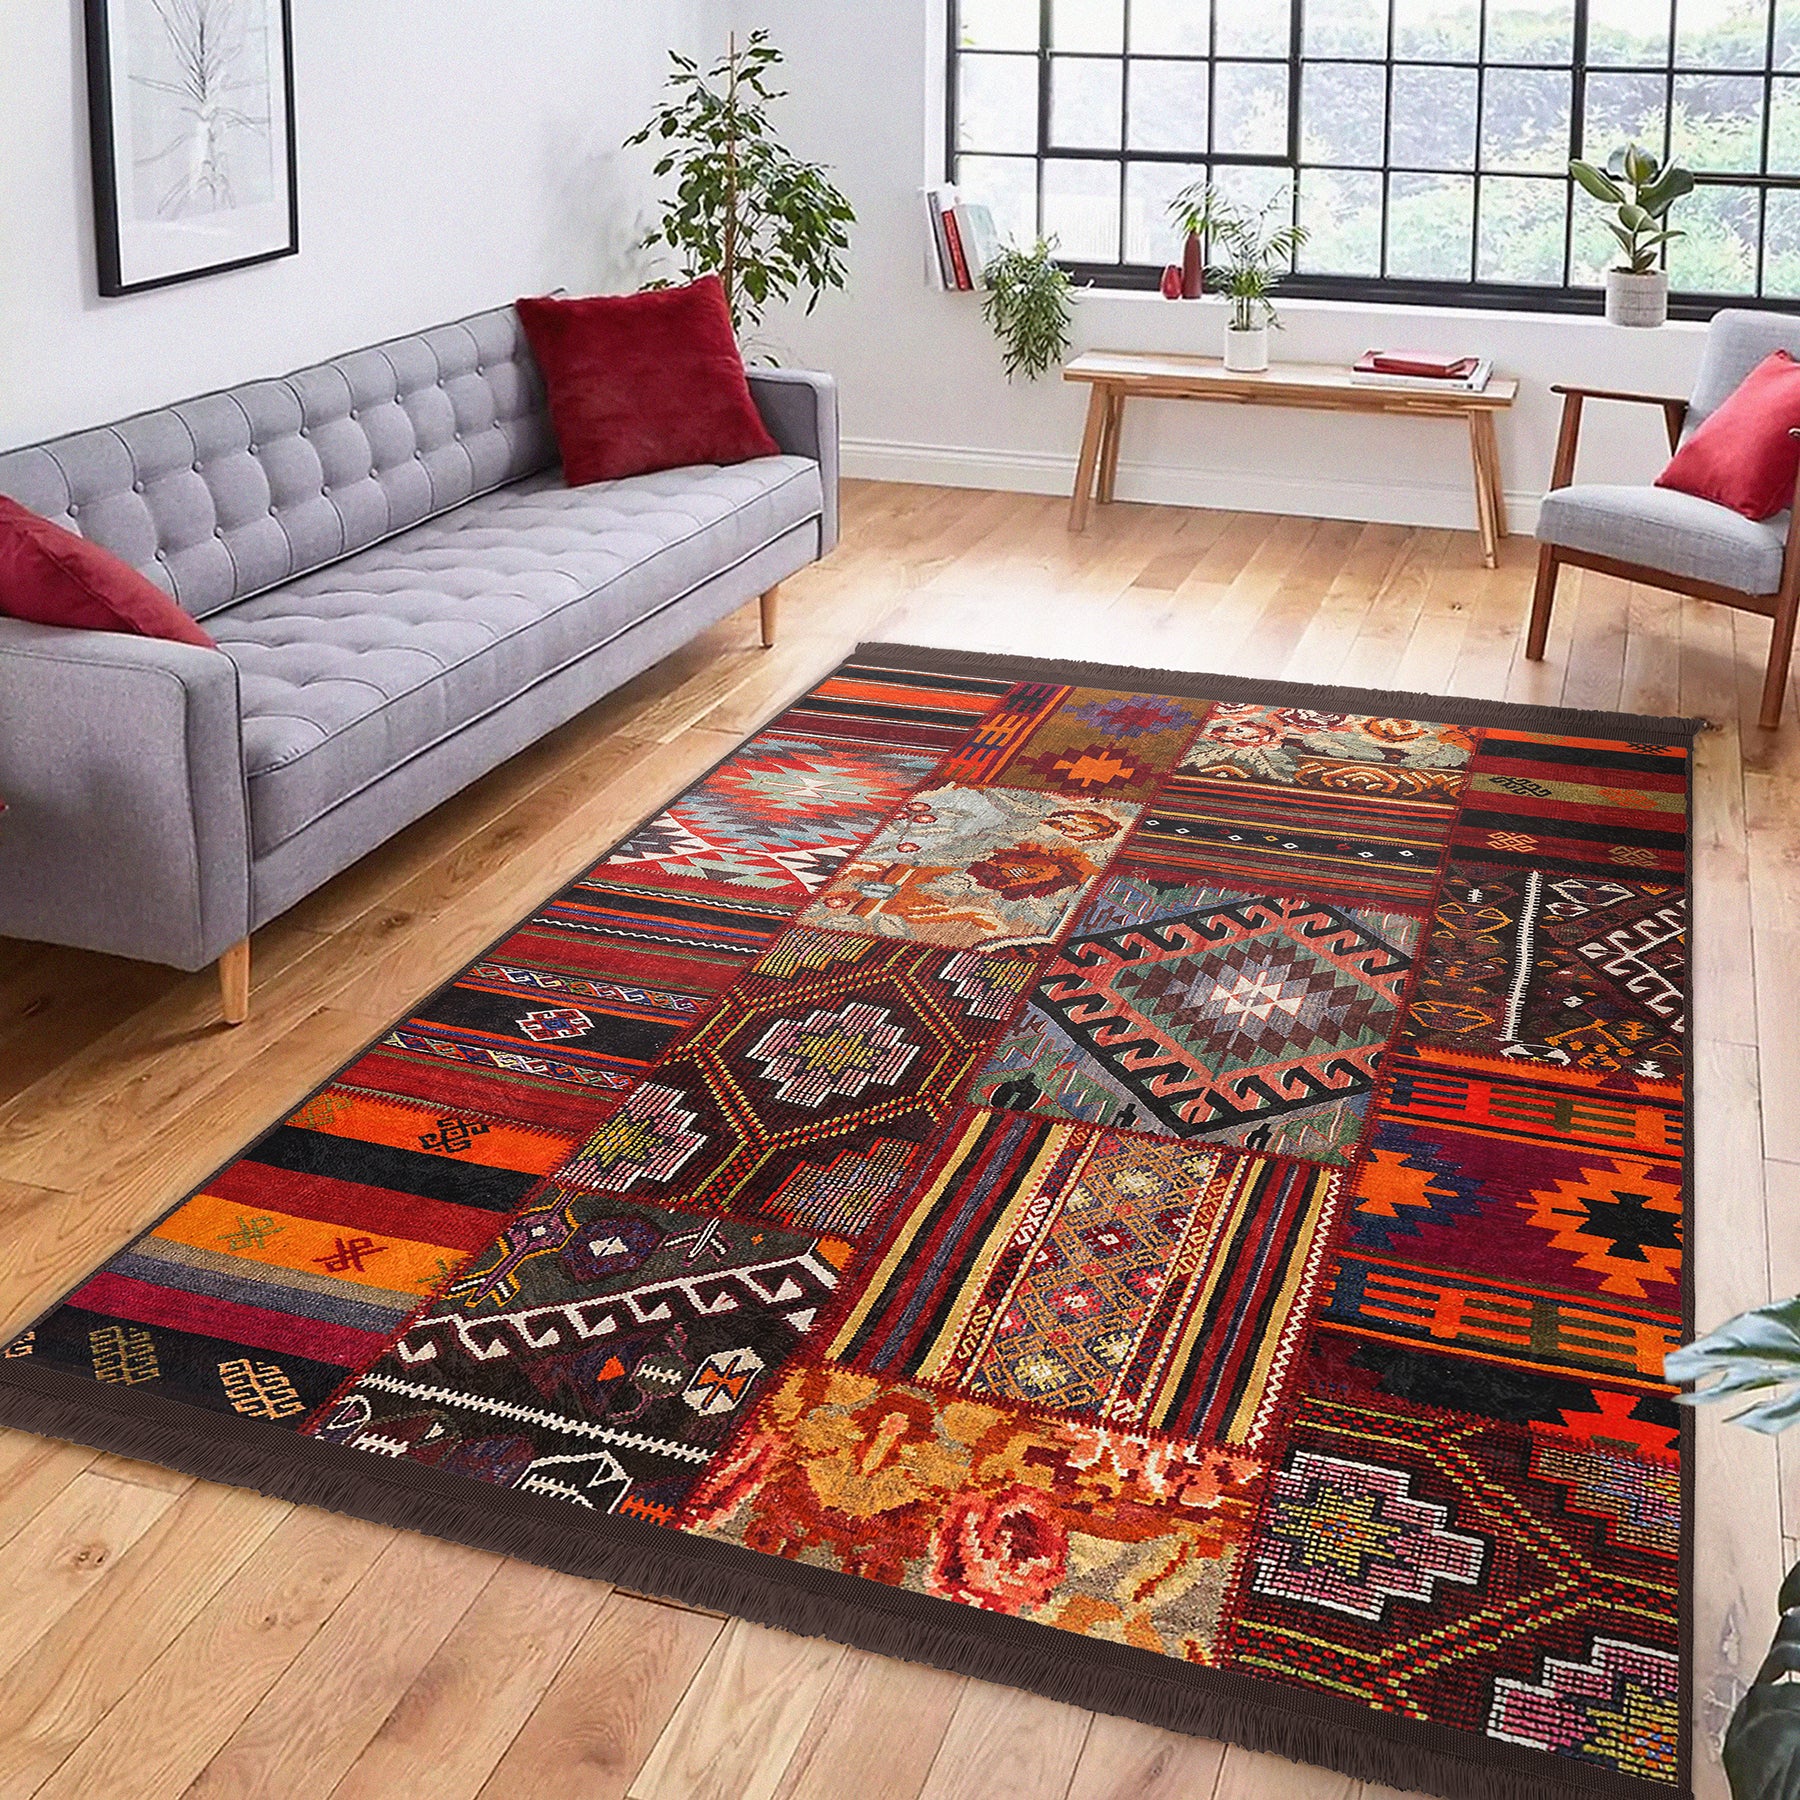 Front view of Ethnic Home Decor Area Rug